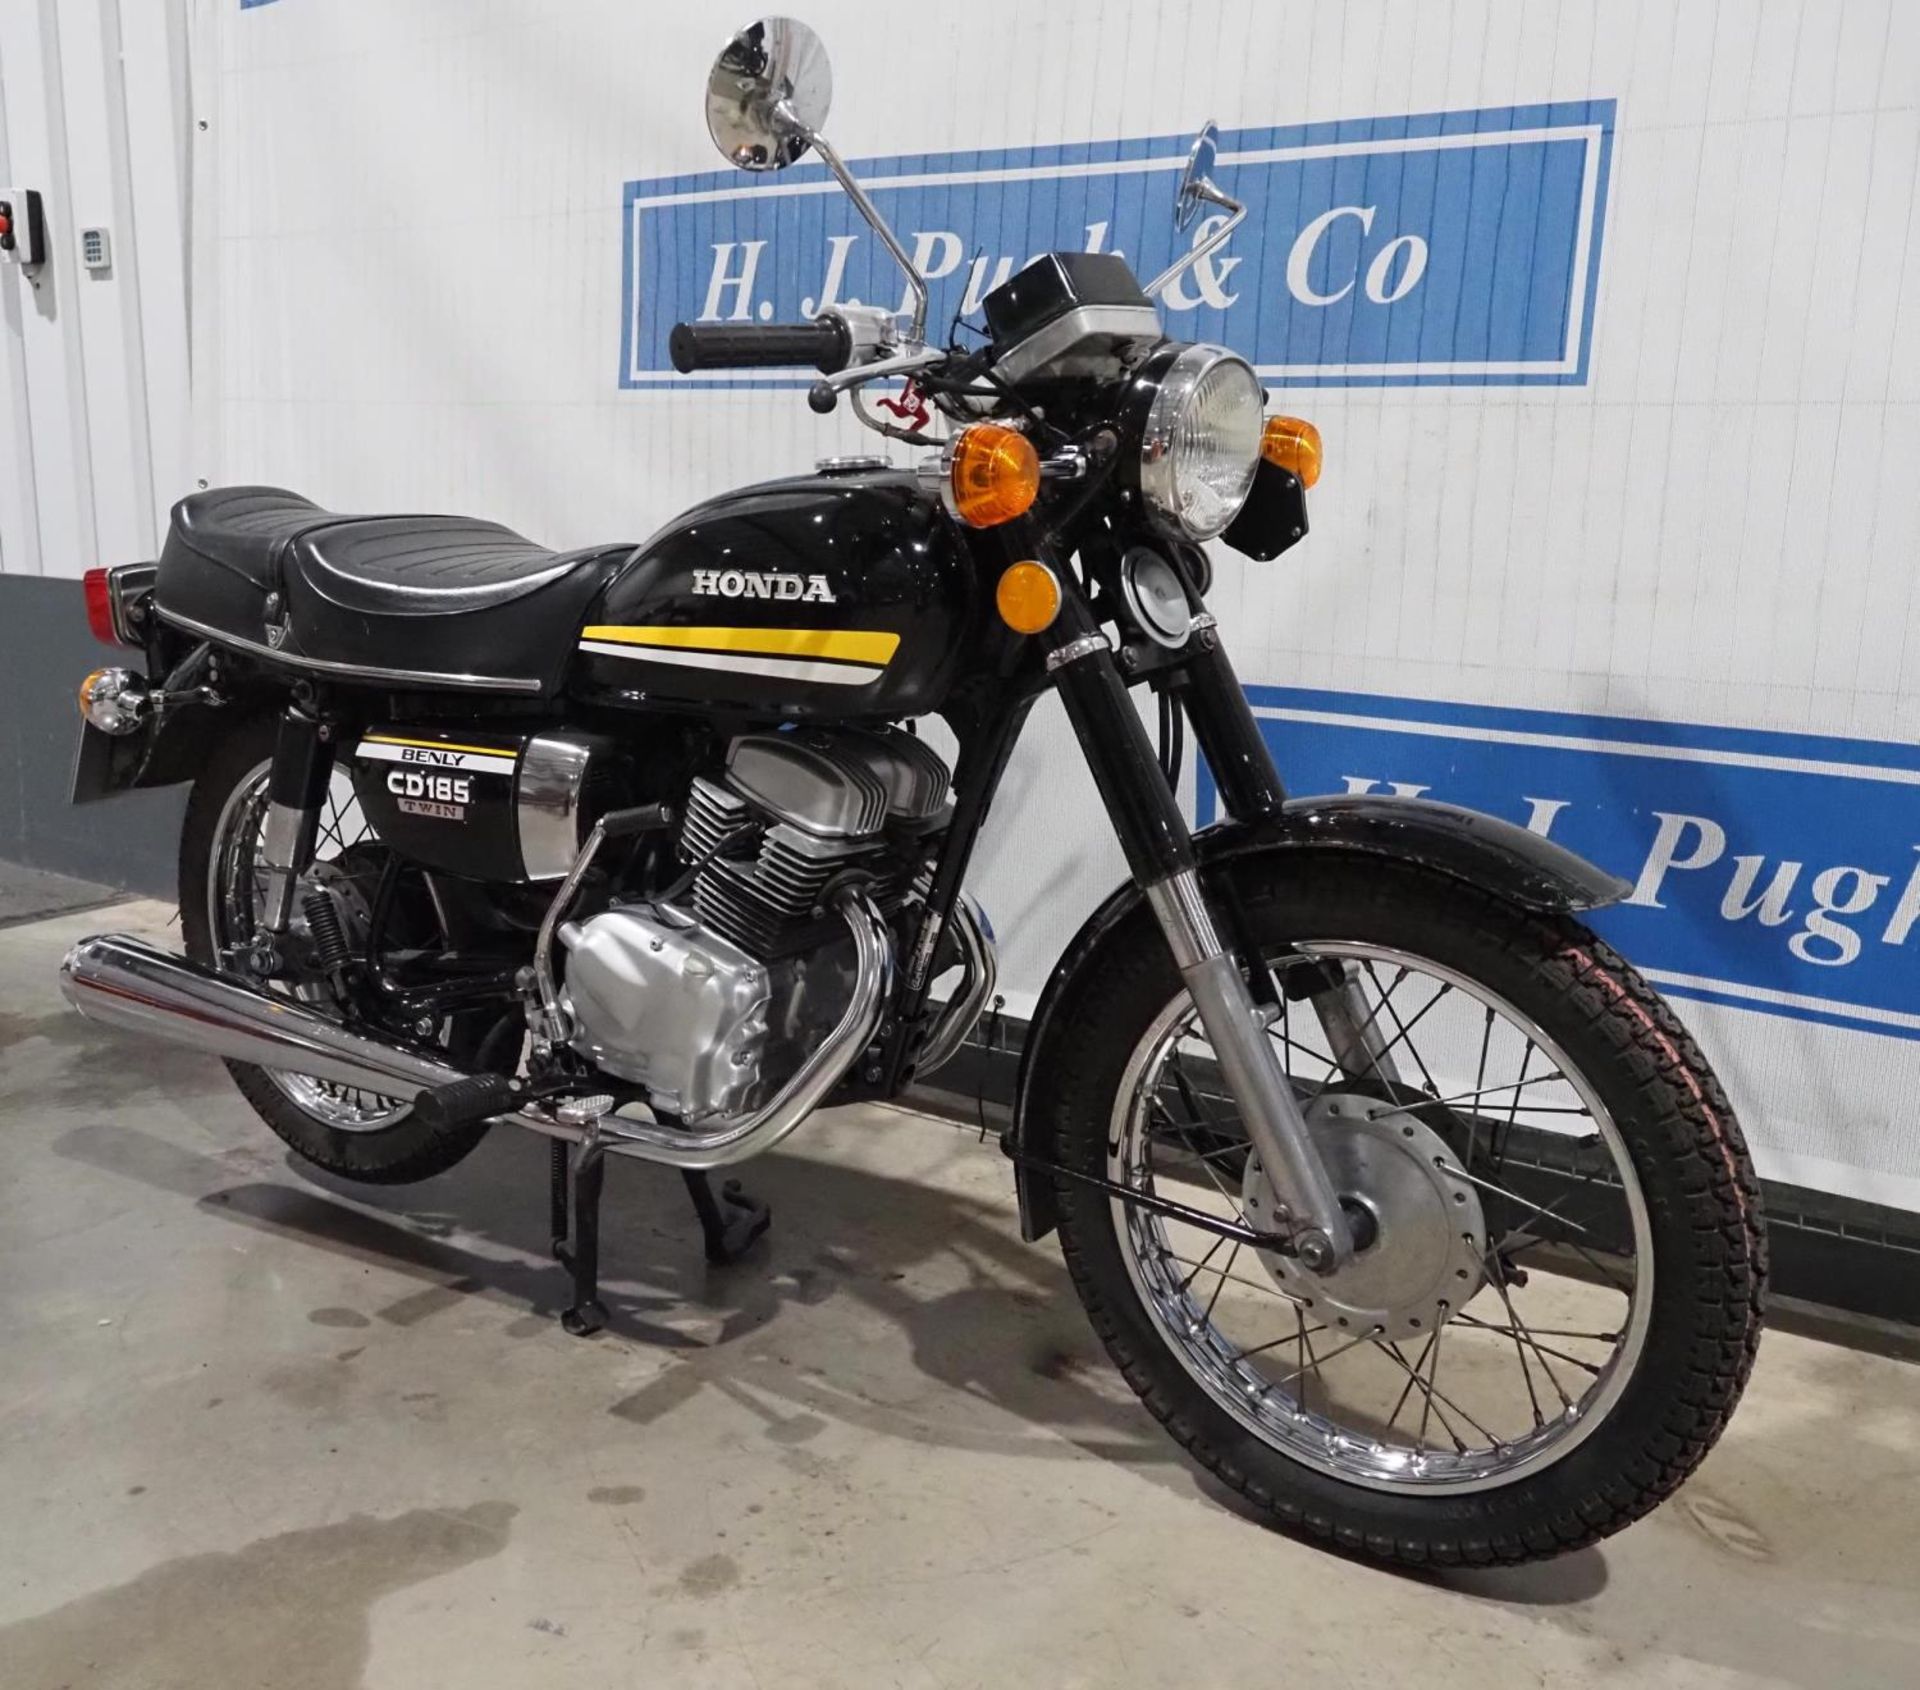 Honda CD185T motorcycle. 180cc. 1979. Runs and rides. In storage 1984-2020. Matching numbers, - Image 2 of 6